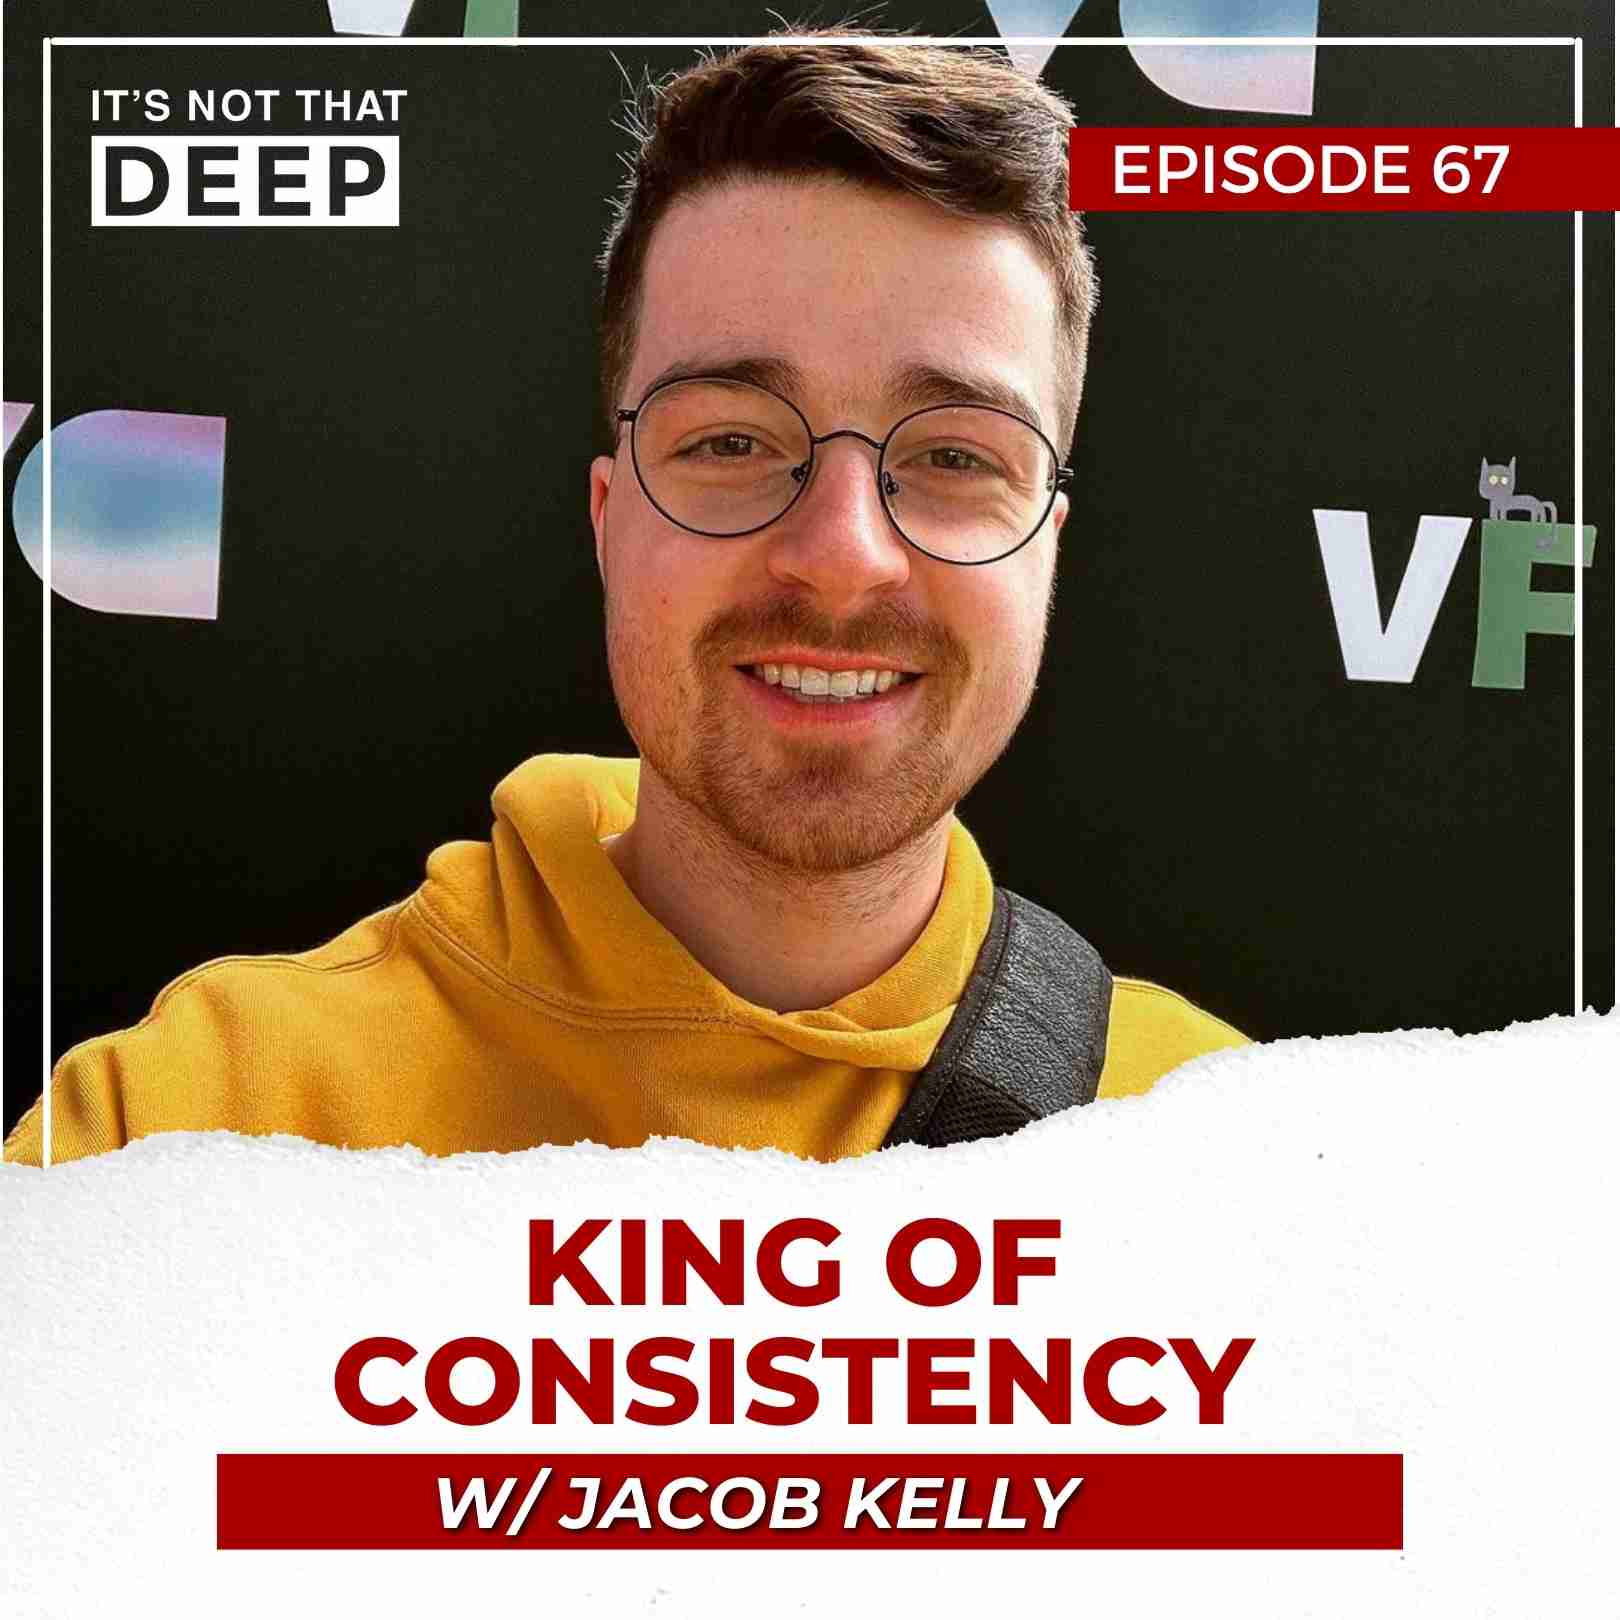 Jacob Kelly | King of Consistency